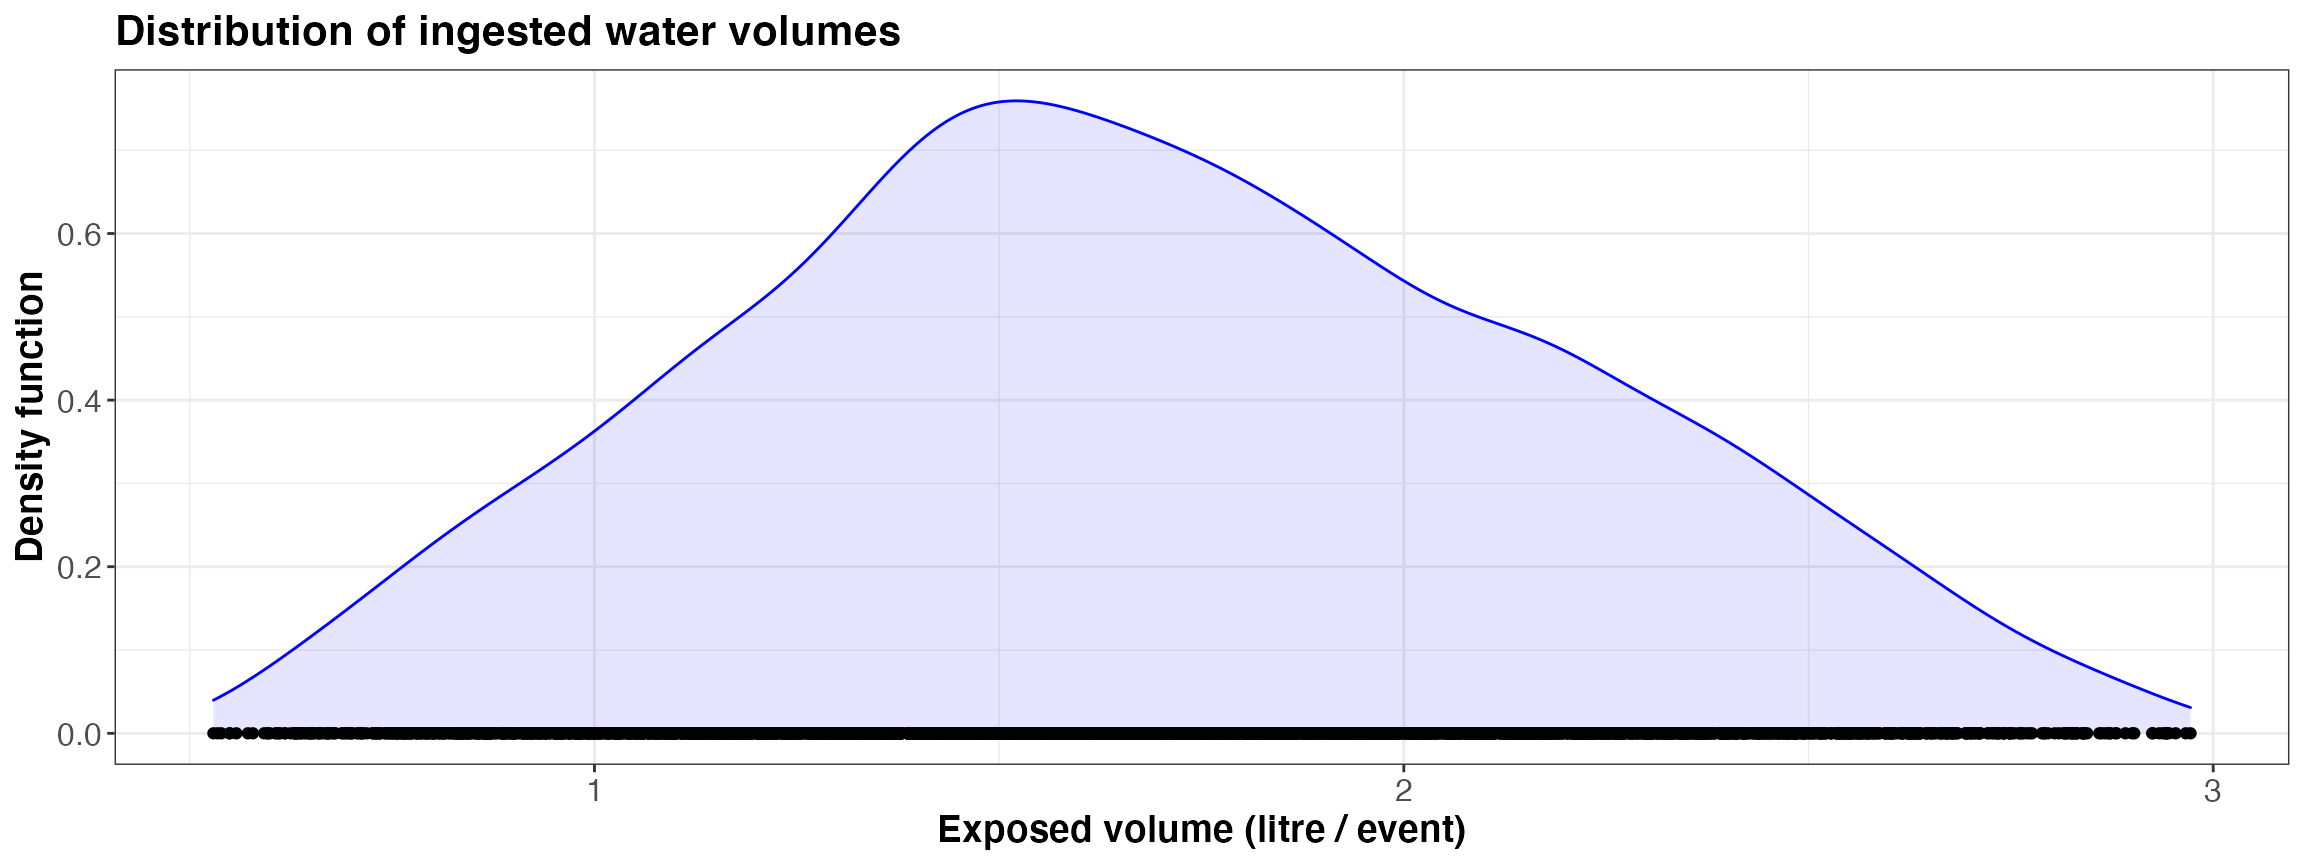 Simulated ingested volume per event